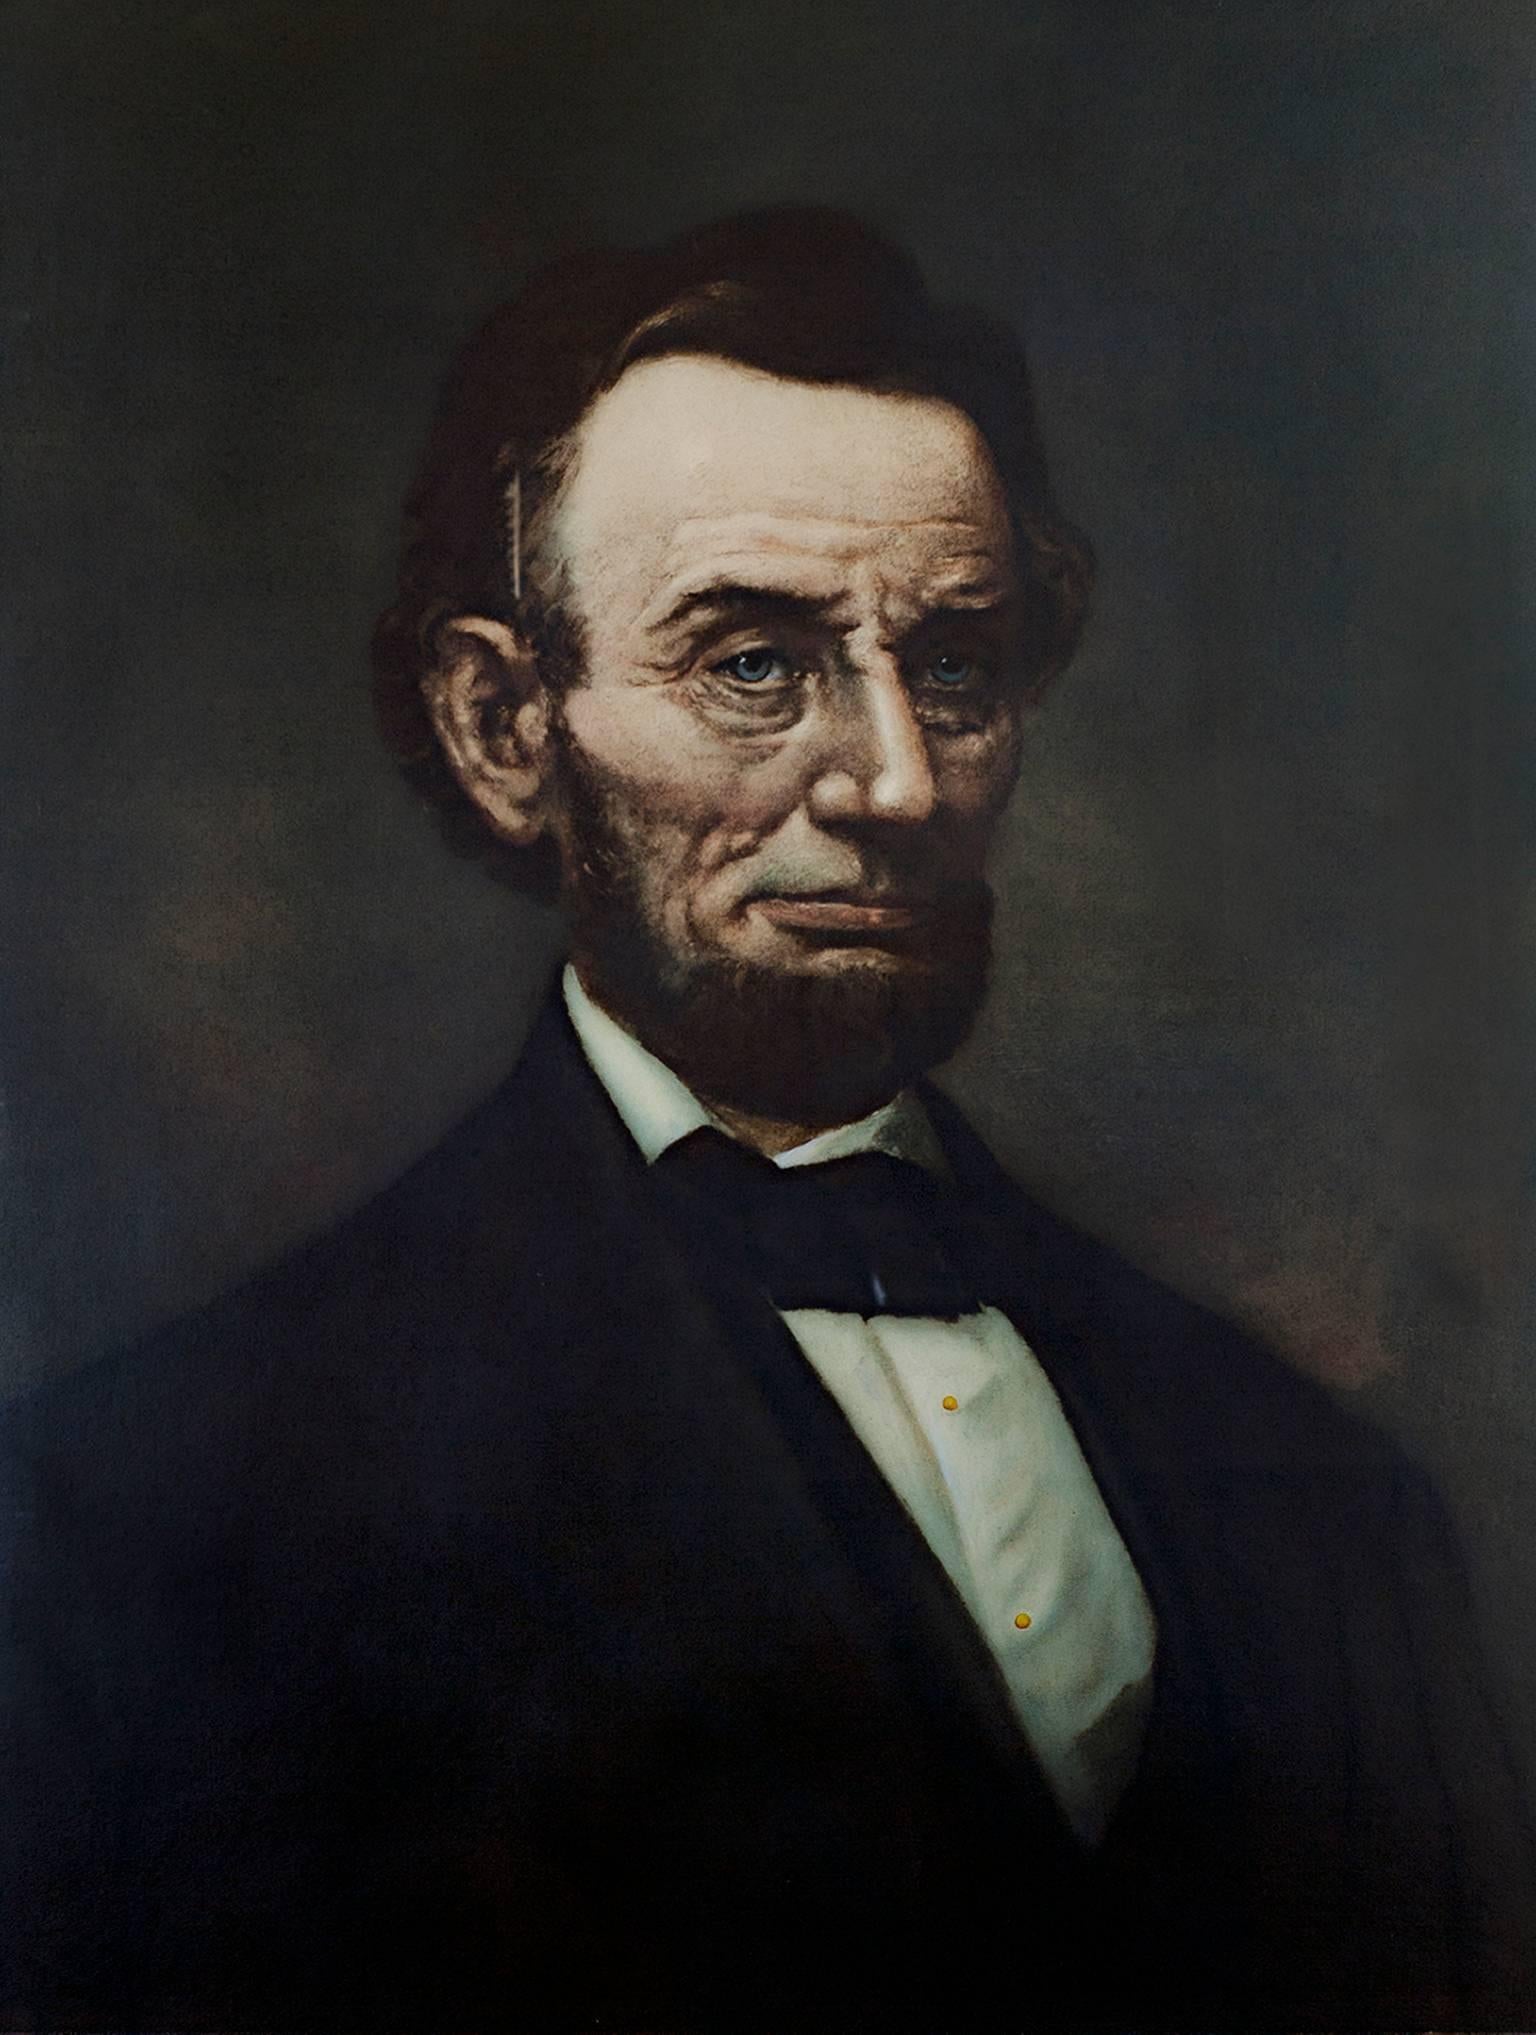 Unknown Portrait Print - "Large Portrait of Abraham Lincoln, " Hand-embellished Print based on Photograph